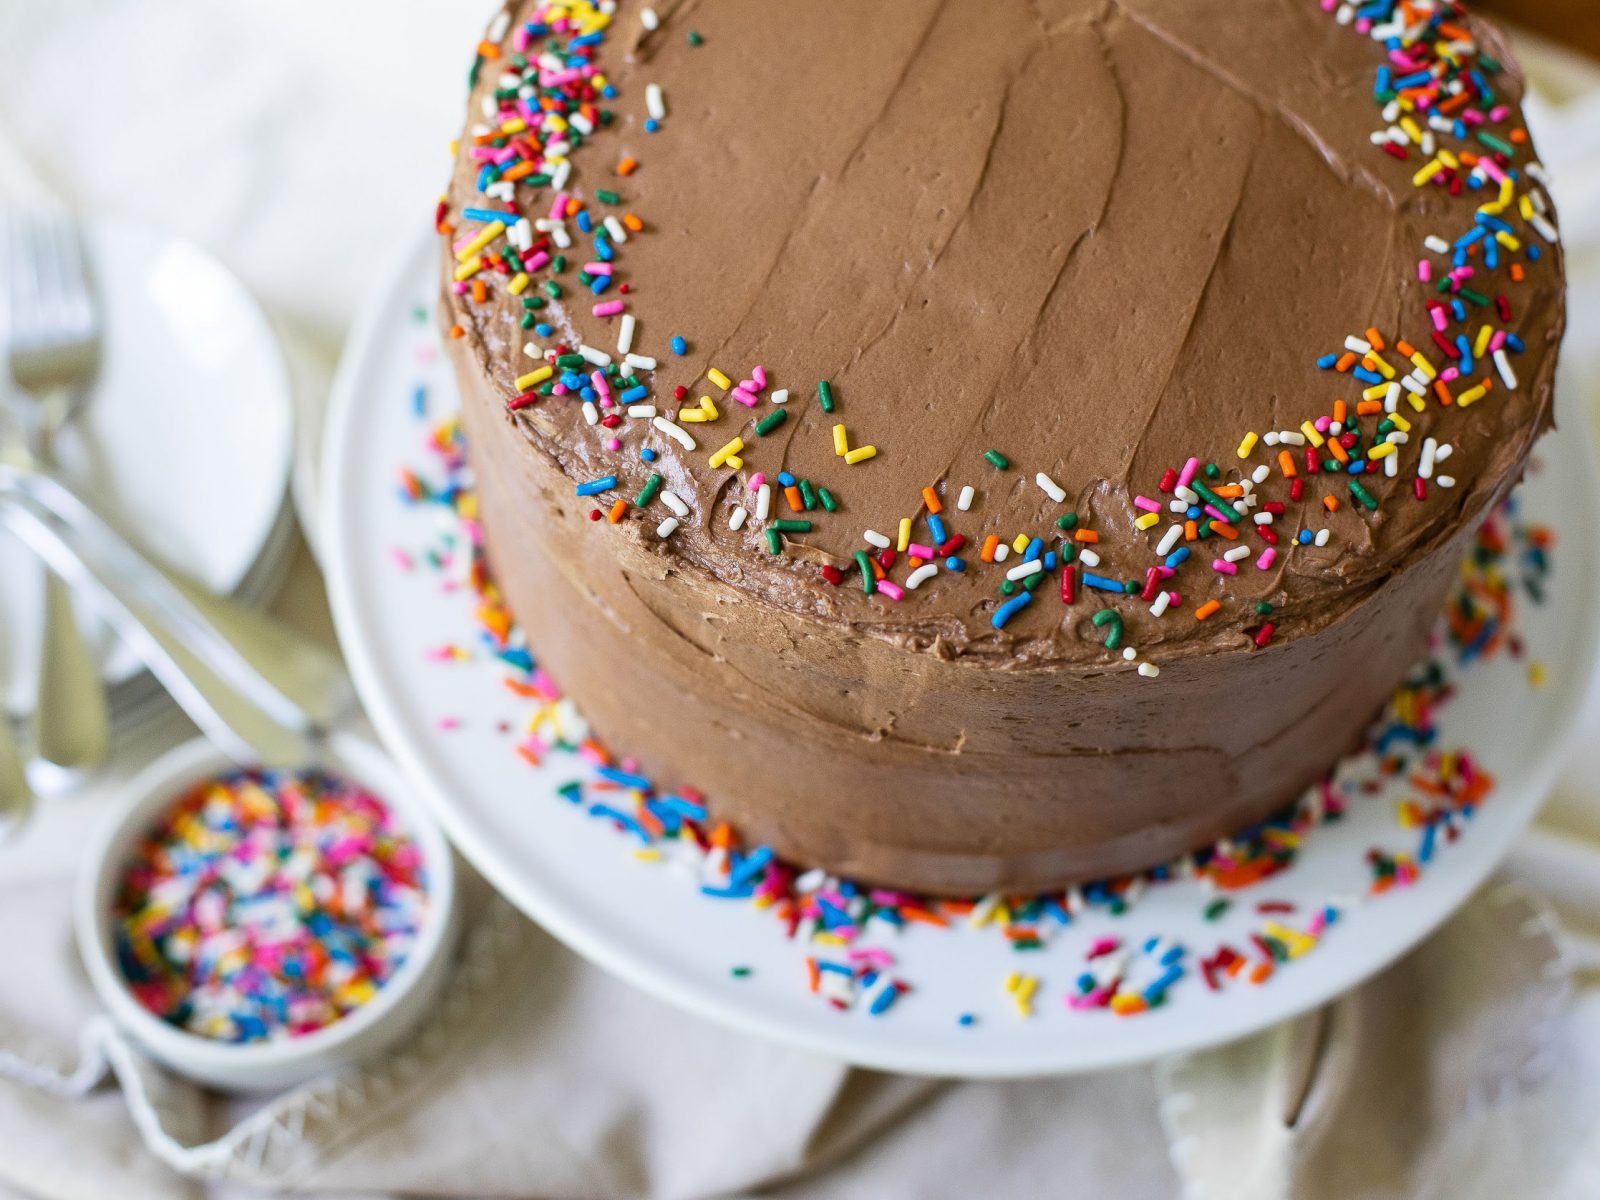 Serve Up A Deliciously Moist And Easy Chocolate Cake And Save Now At Publix